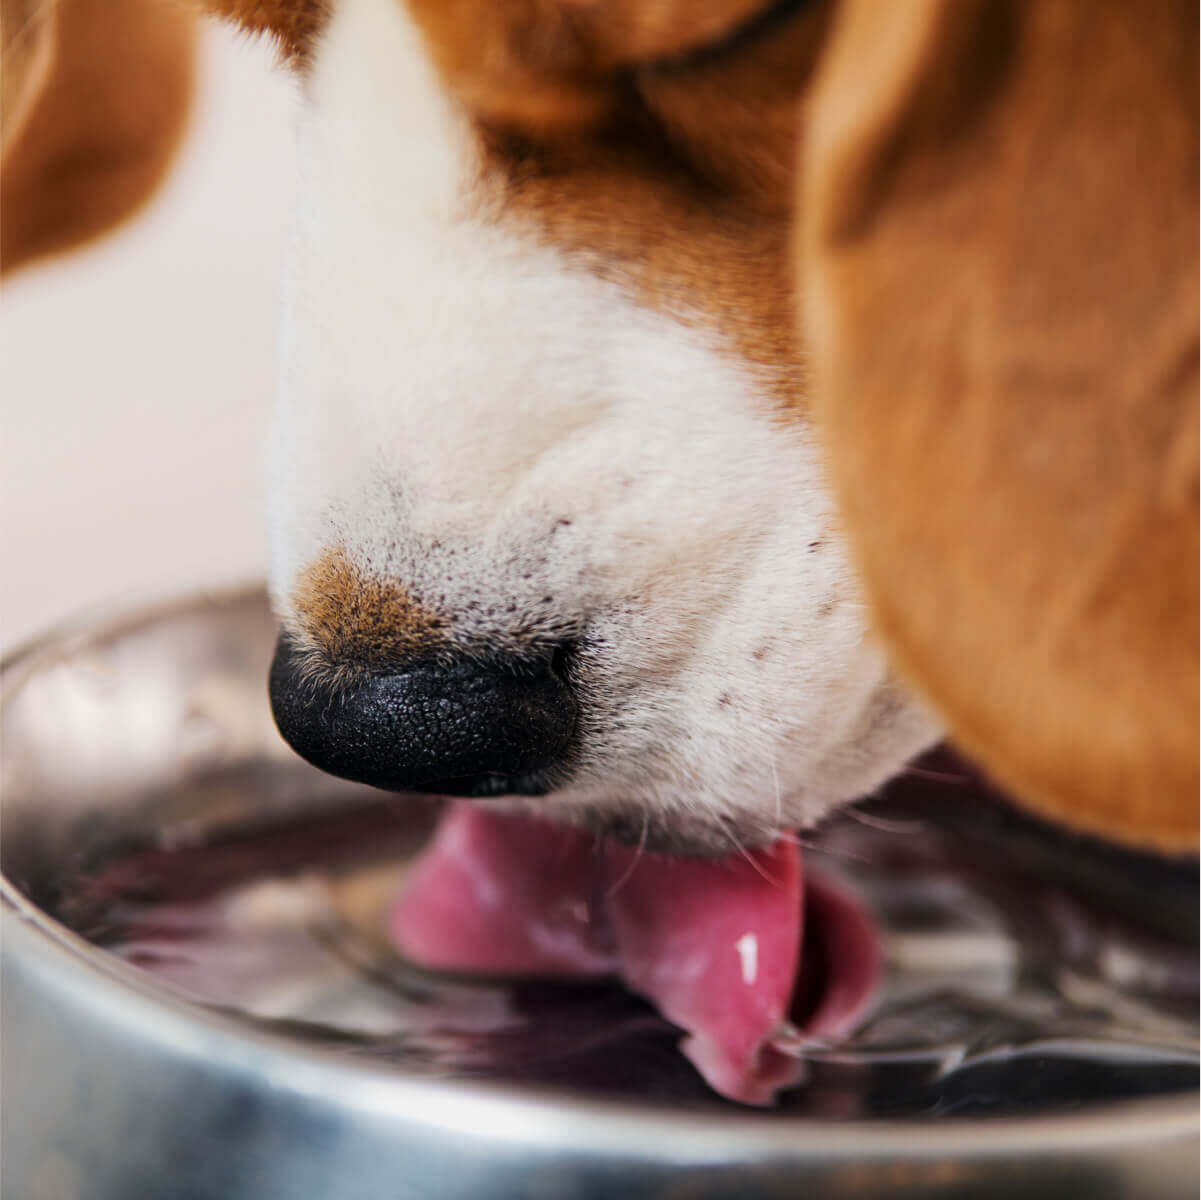 A thirsty pup quenches its thirst from a shiny metal bowl, lapping up refreshing water with delight.